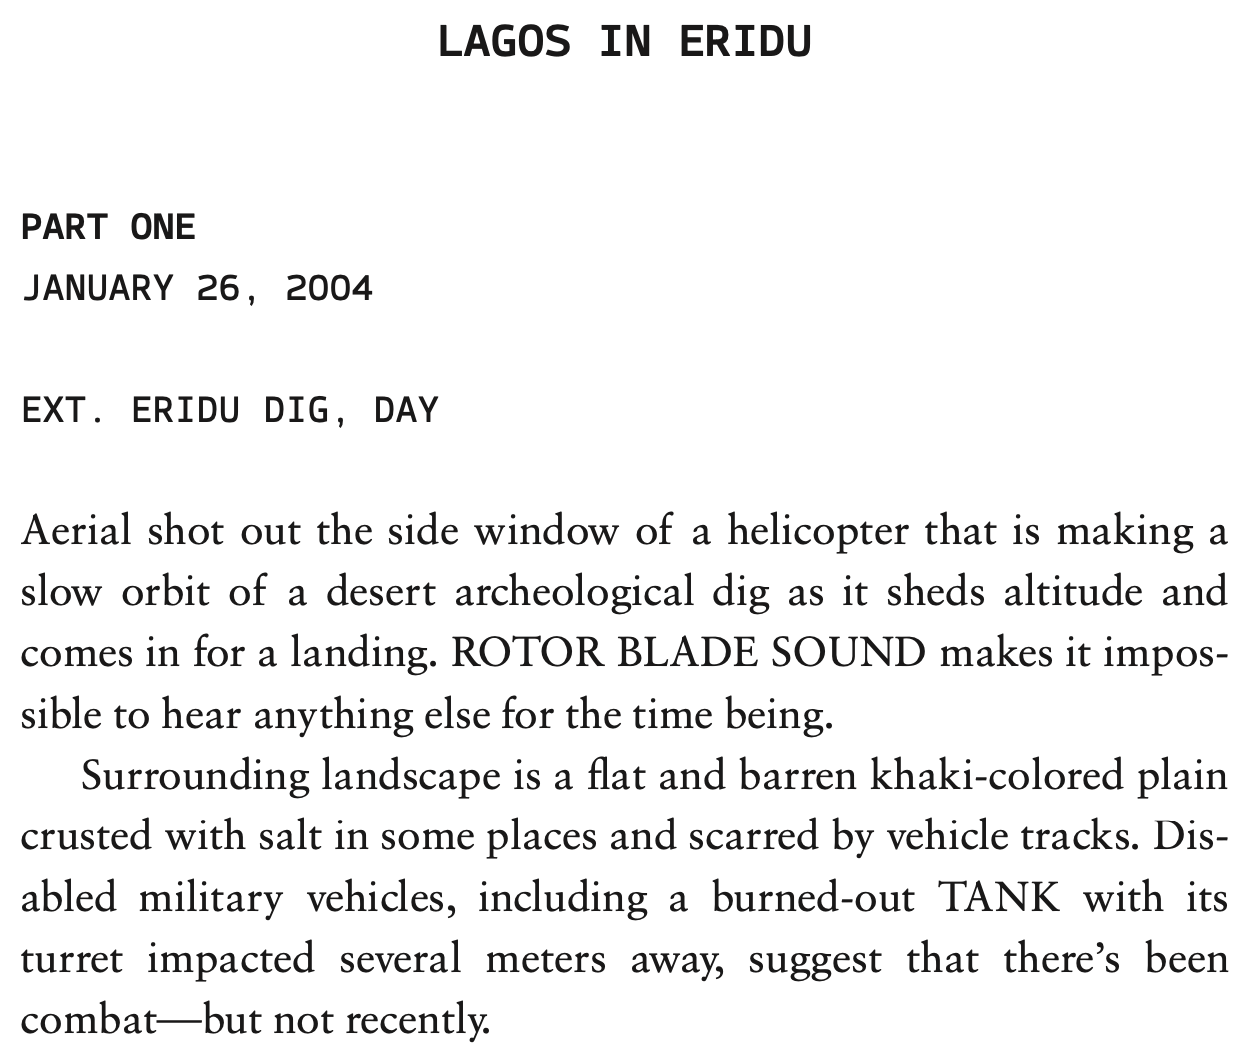 Excerpt from a screenplay. LAGOS IN ERIDU, PART ONE. JANUARY 26, 2004. EXT. ERIDU DIG, DAY. Aerial shot out the side window of a helicopter that is making a slow orbit of a desert archeological dig as it sheds altitude and comes in for a landing. ROTOR BLADE SOUND makes it impossible to hear anything else for the time being. Surrounding landscape is a flat and barren khaki-colored plain crusted with salt in some places and scarred by vehicle tracks. Disabled military vehicles, including a burned-out TANK with its turret impacted several meters away, suggest that there’s been combat–but not recently.